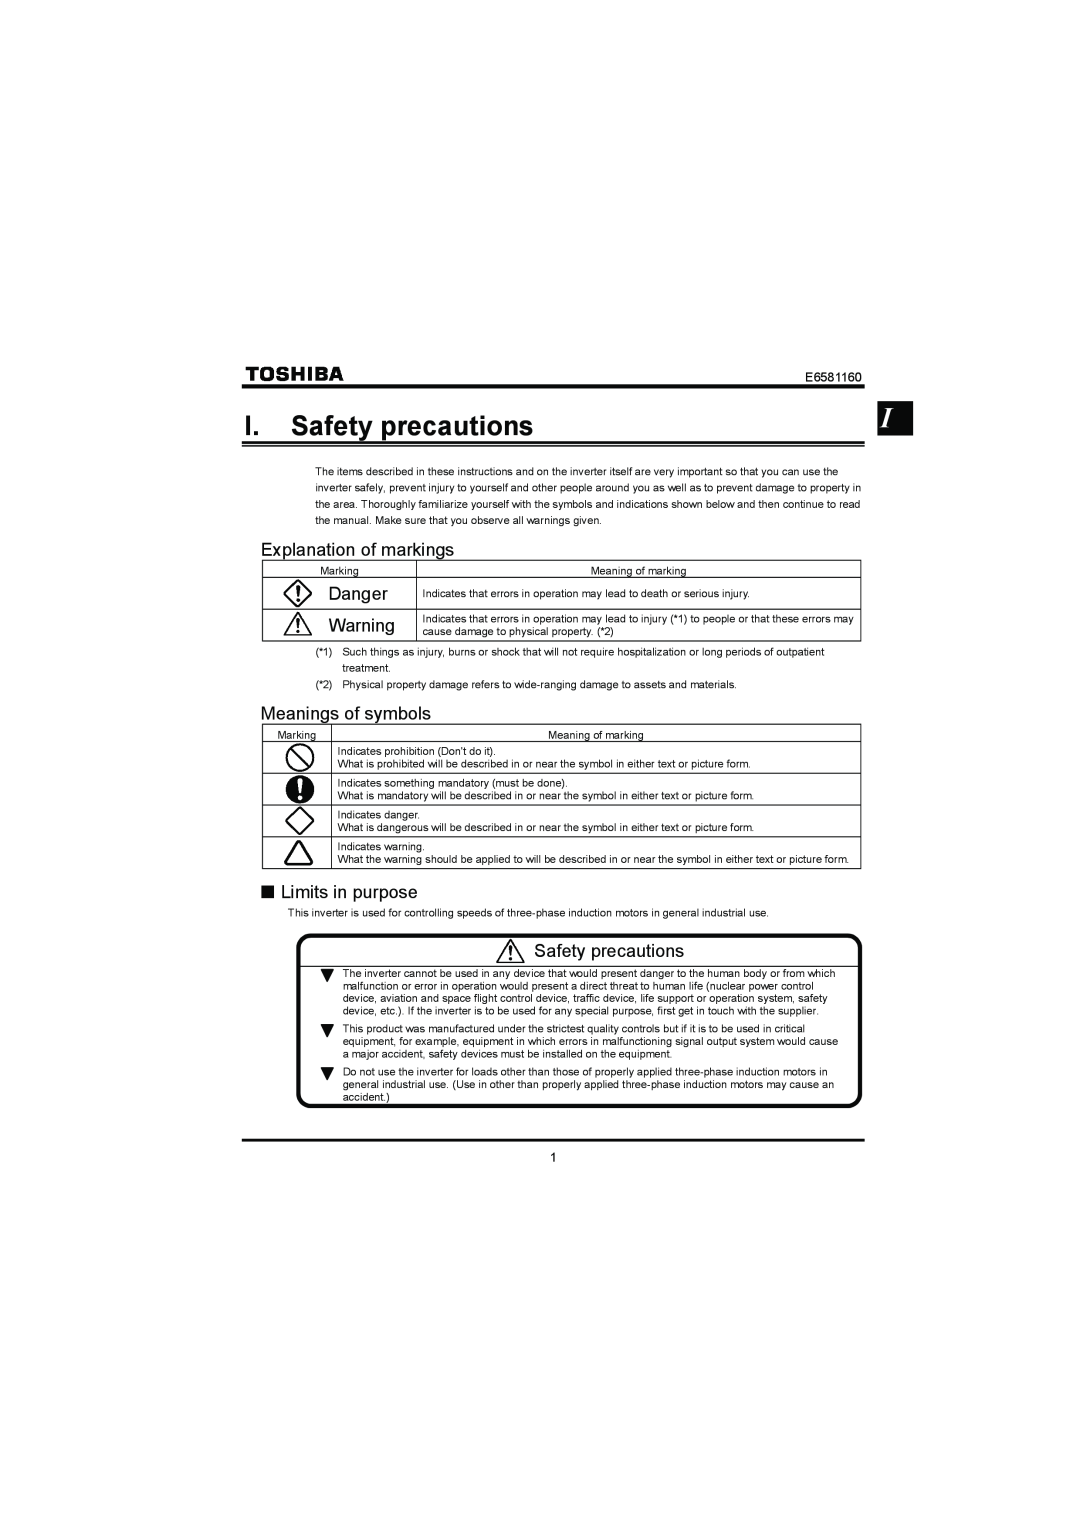 Toshiba VF-S11 I. Safety precautions, Explanation of markings, Danger, Meanings of symbols, QLimits in purpose, E6581160 